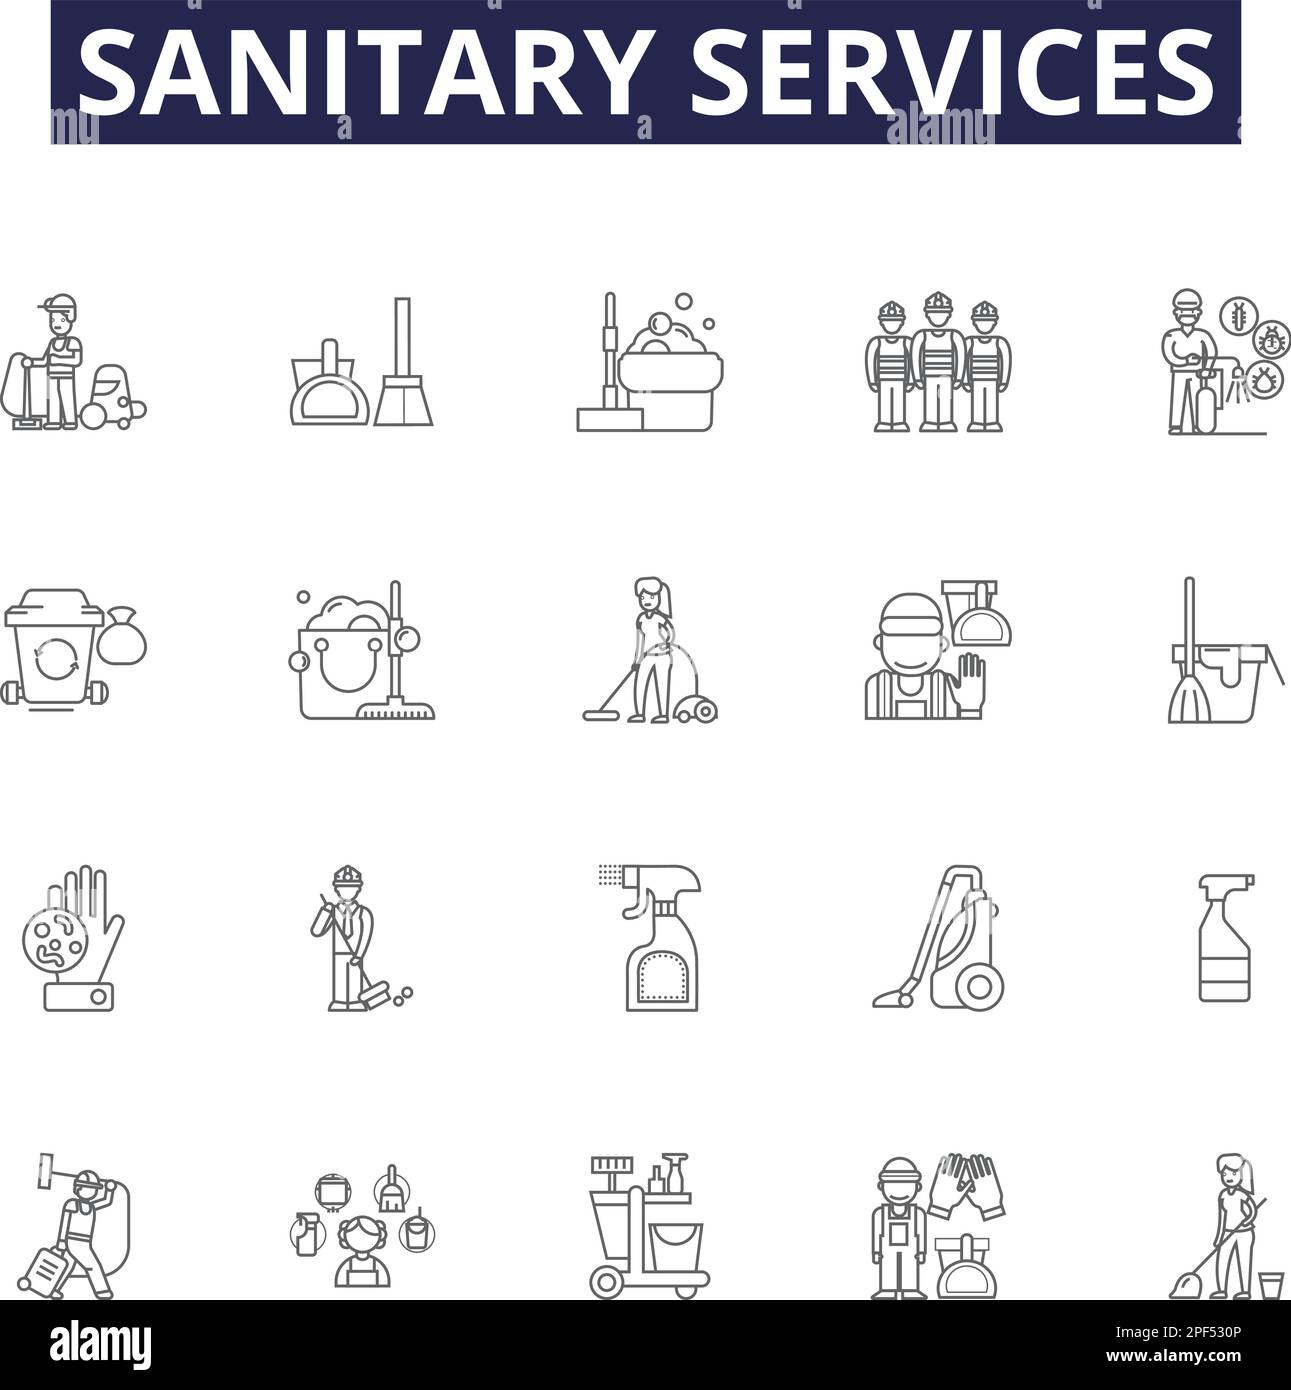 Sanitary services line vector icons and signs. Sanitation, Cleanliness, Sewerage, Waste, Disposal, Lavatories, Drains, Toilets outline vector Stock Vector